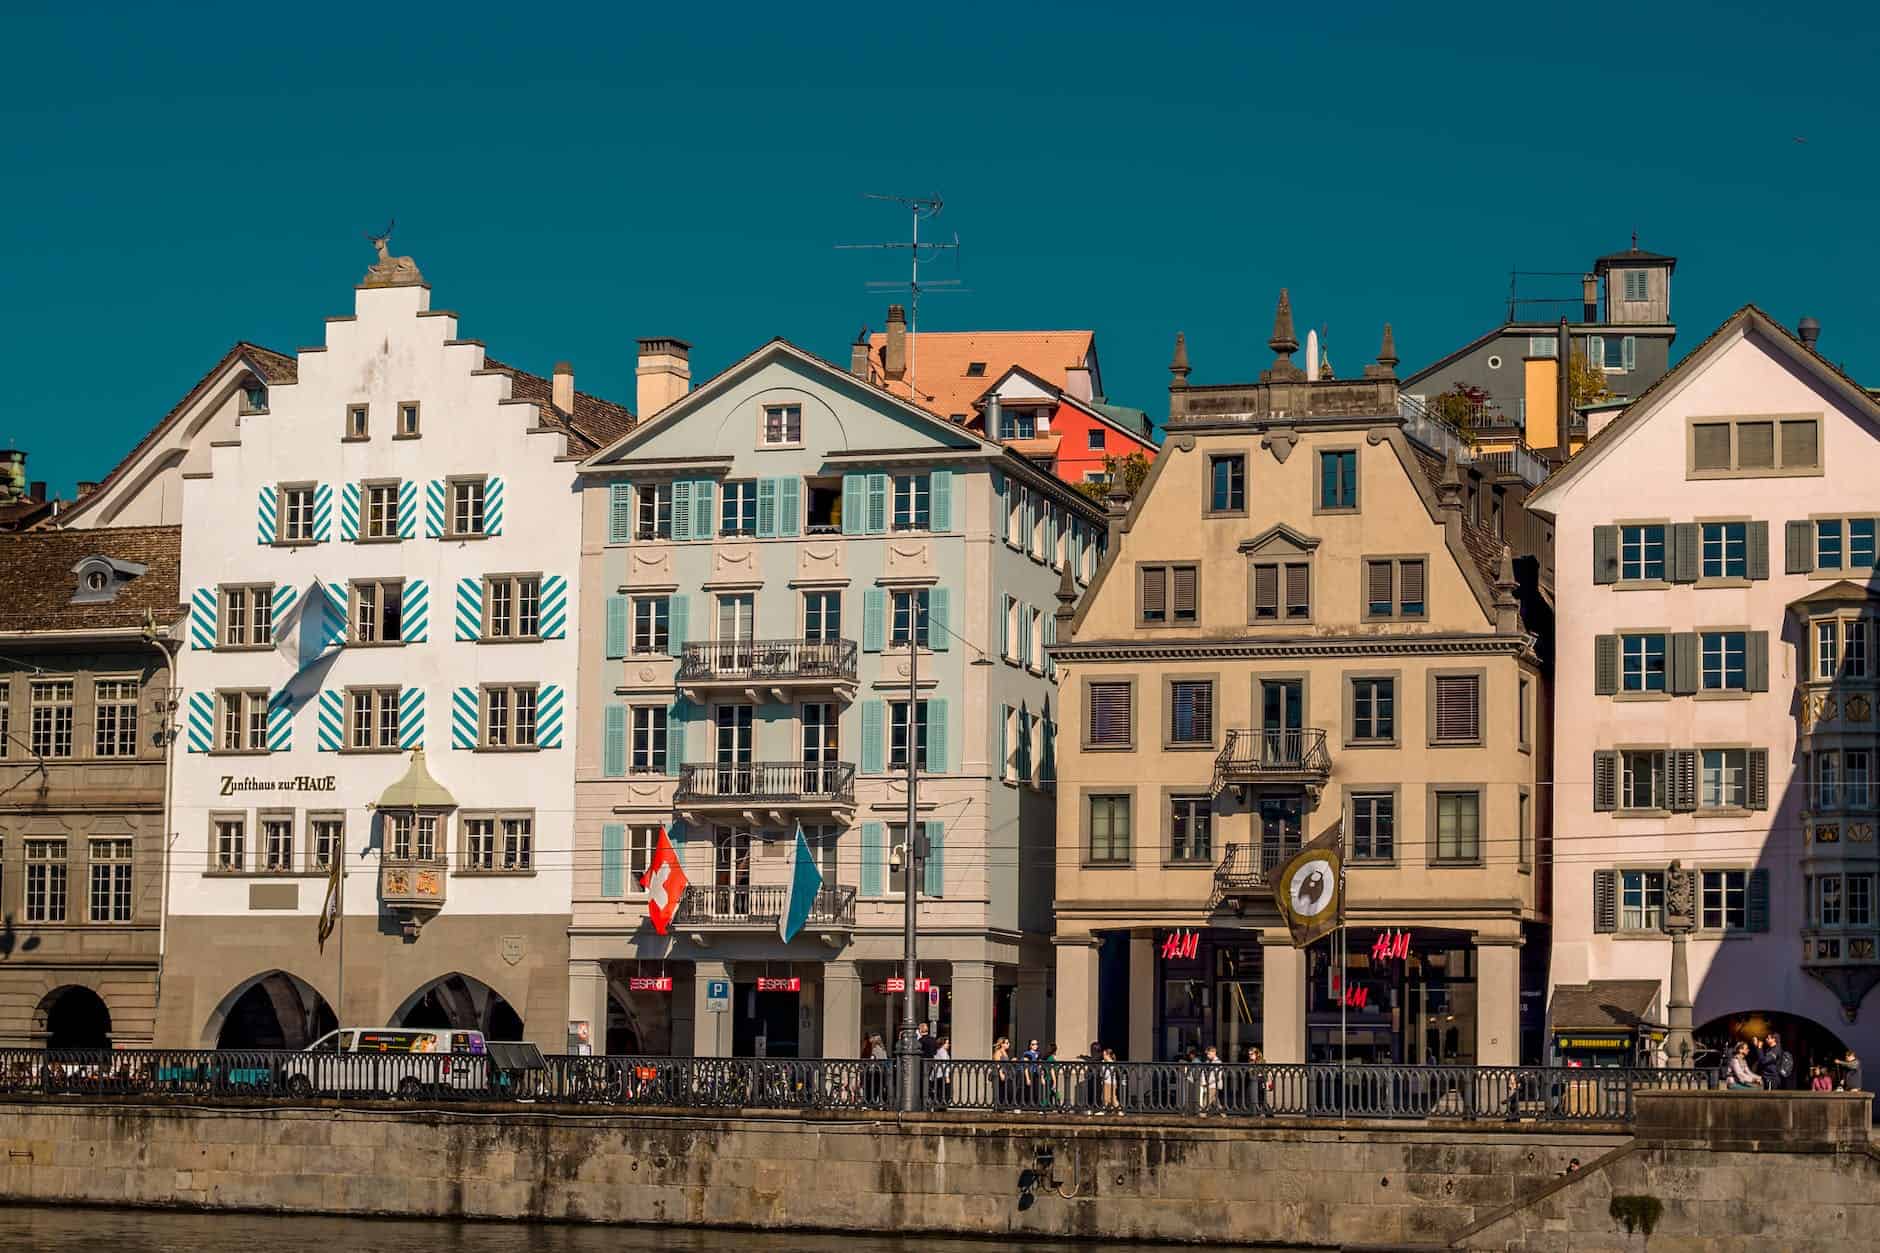 Zurich world’s most expensive city (again)